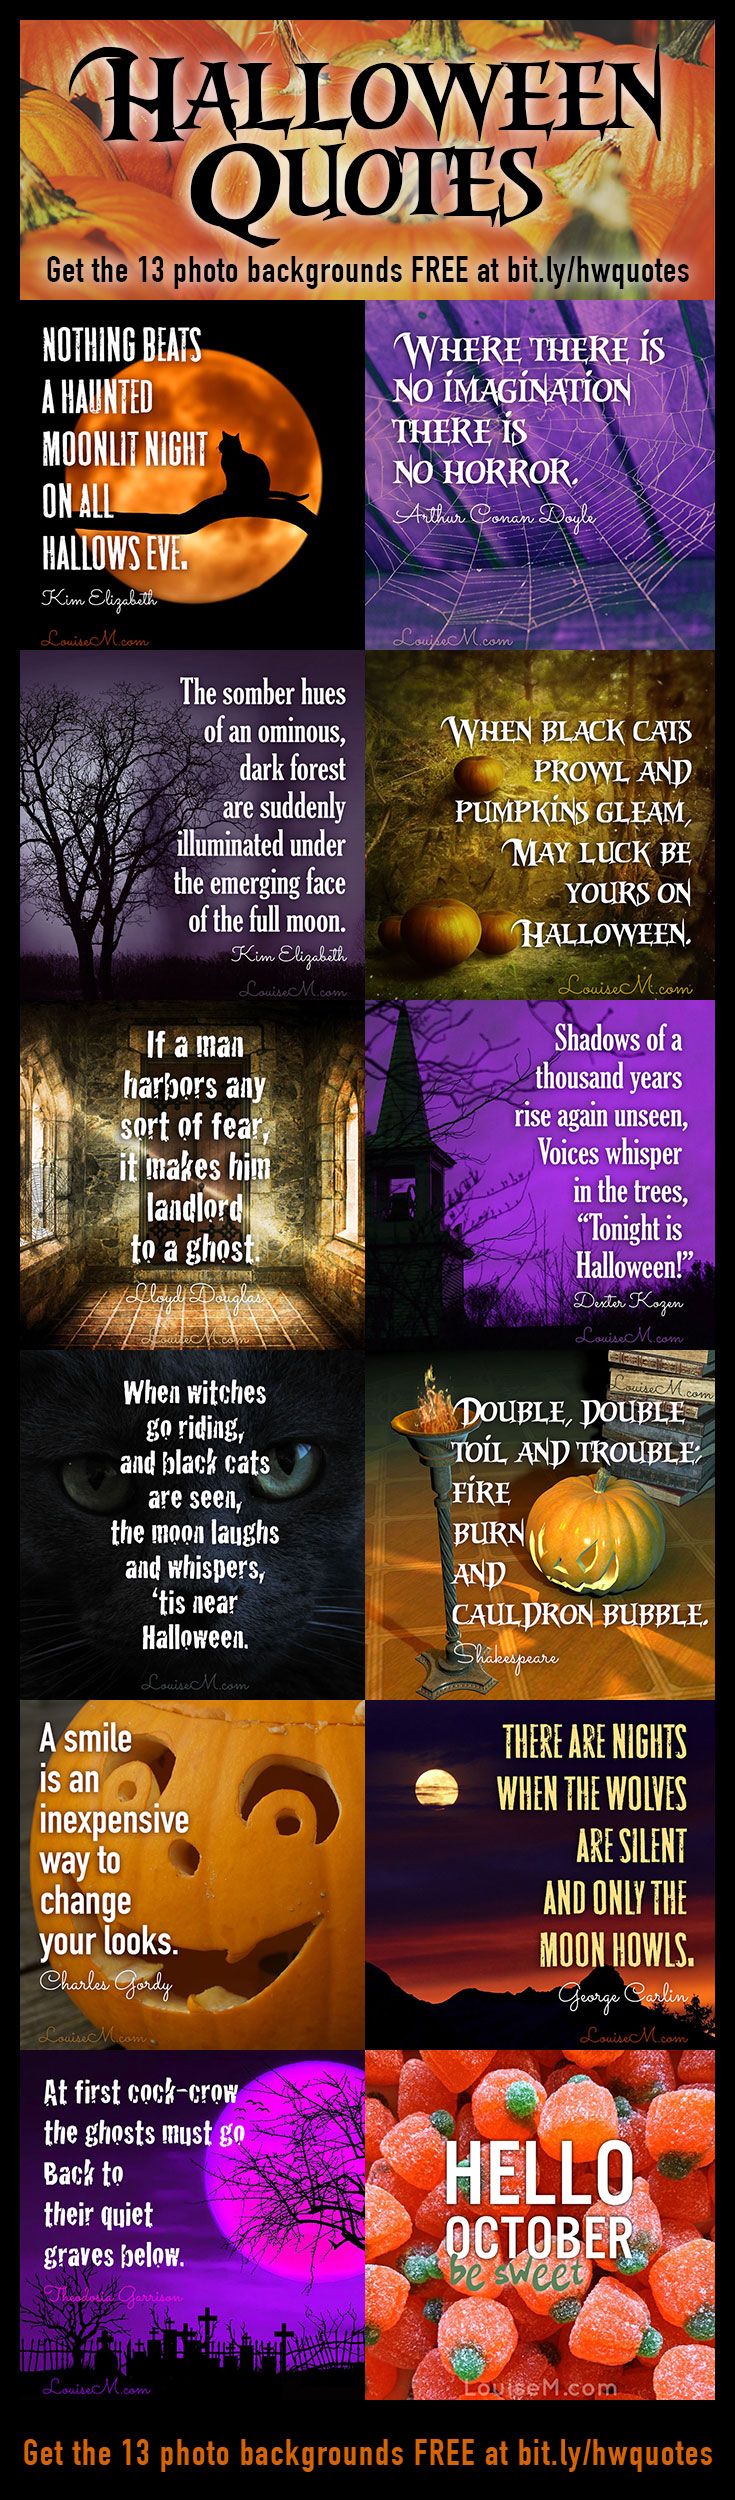 BOO! Halloween Quotes & FREE Photo You Need to Bewitch